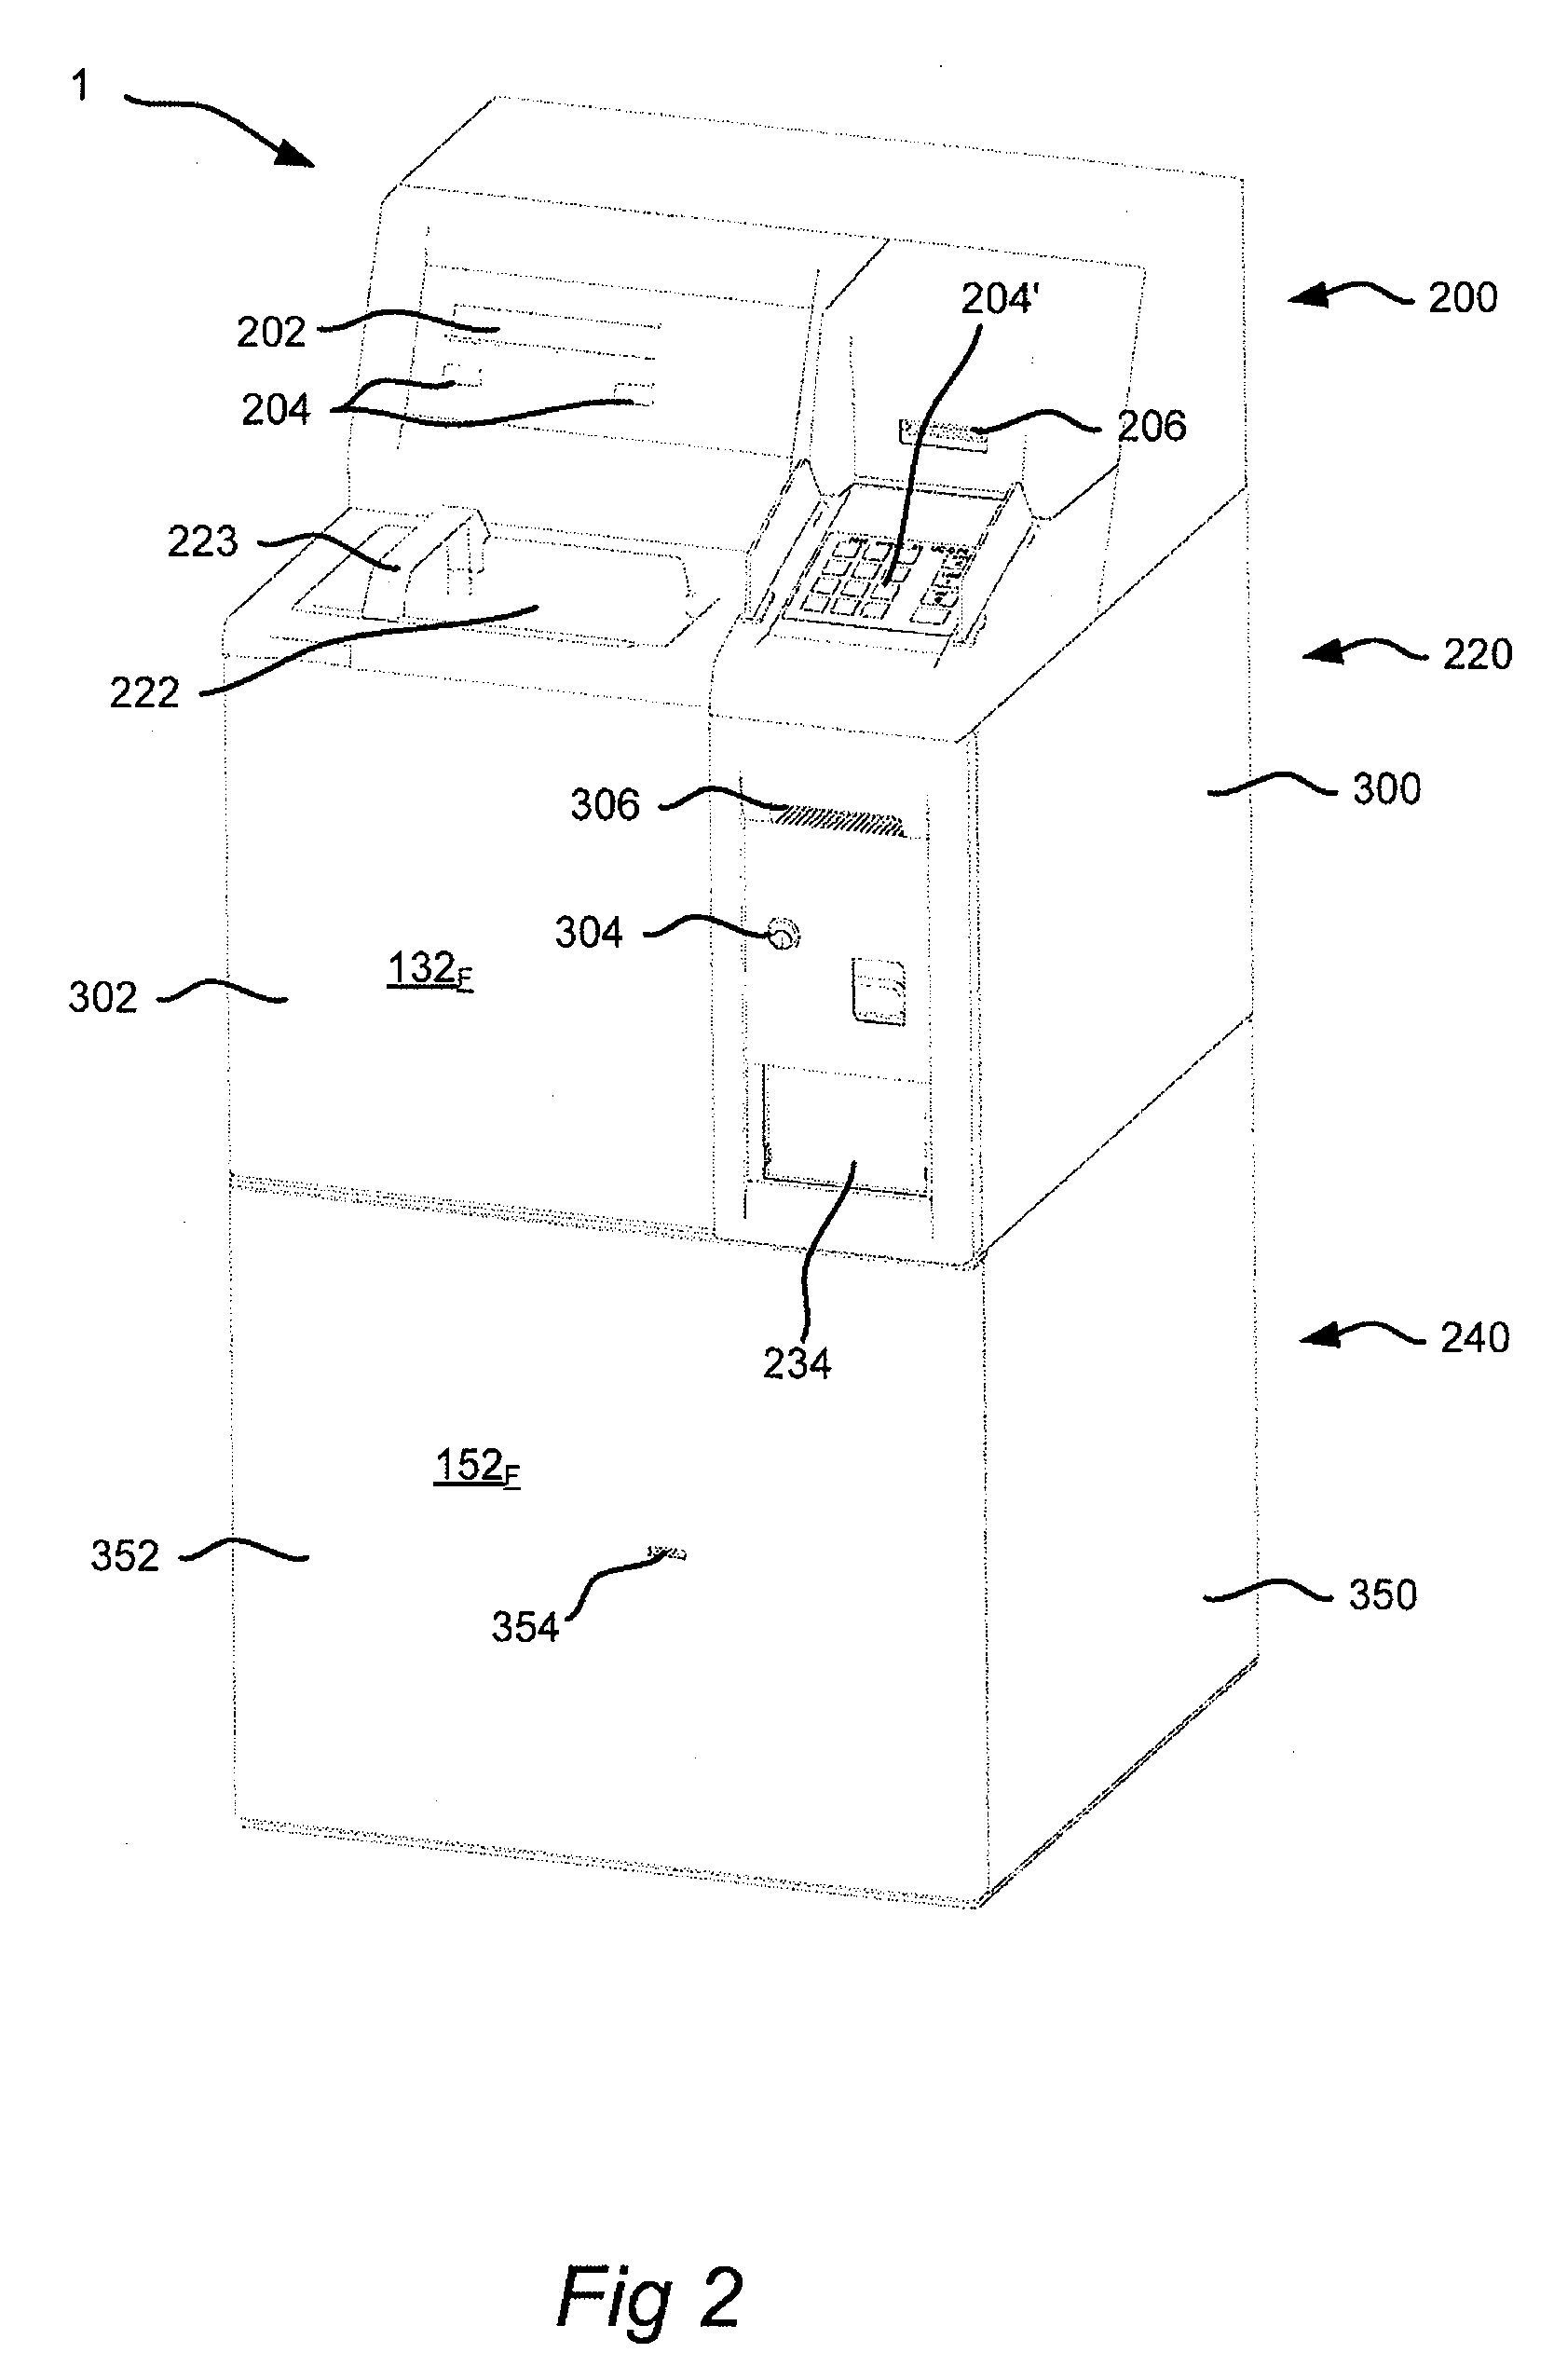 Cash Deposit Apparatus and Associated Methods and Devices